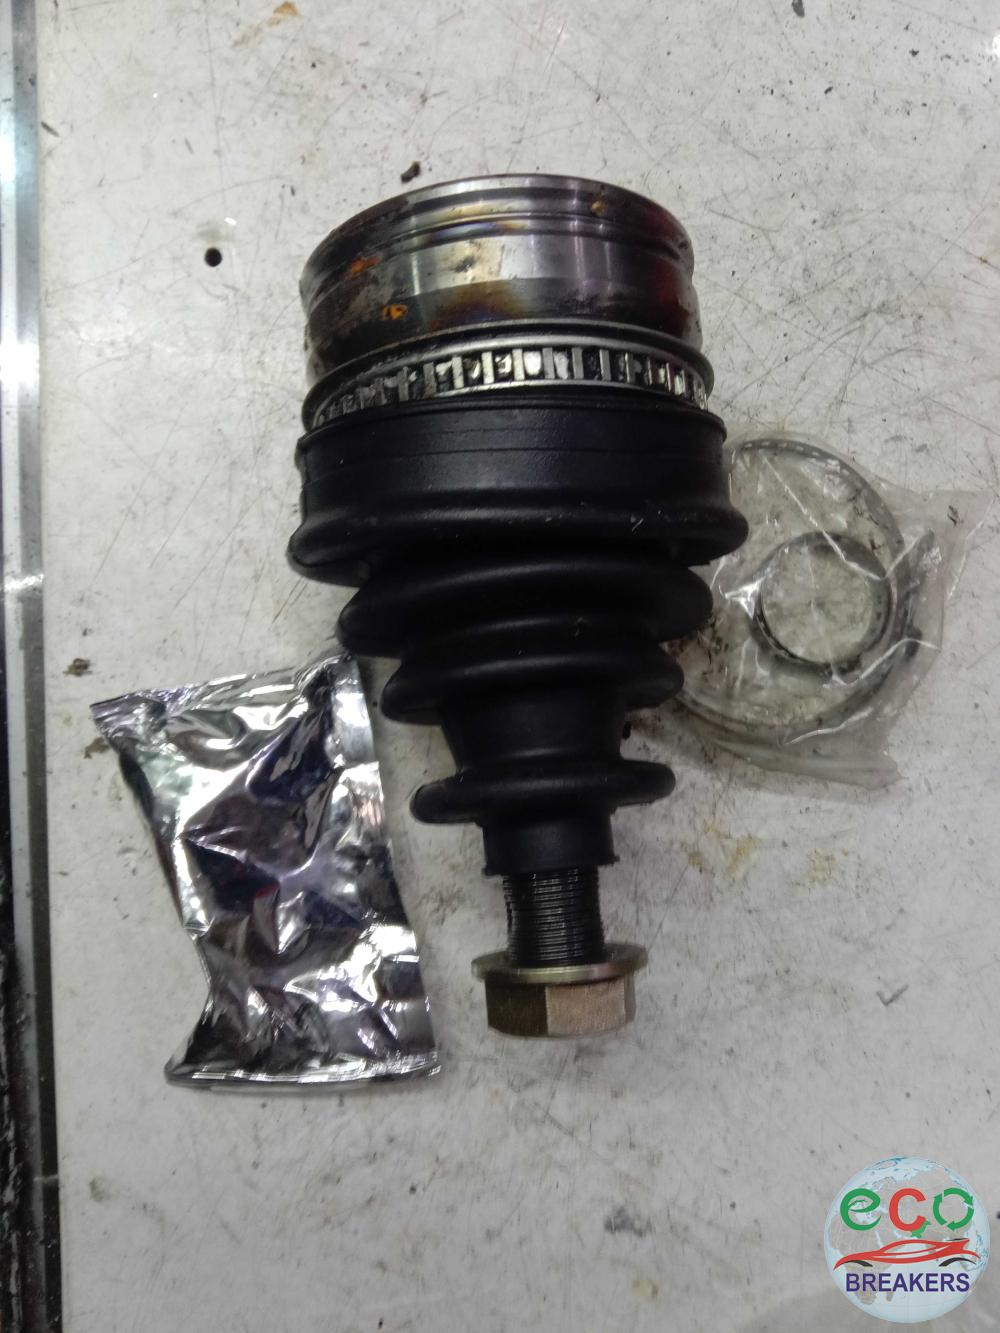 Toyota Previa MK1 TCR11 Cv Joint Outer RIGHT DRIVER OFF SIDE FRONT OSF 2.4 i 2438 cc Petrol 2TZ-FE / 2TZFE 4 Speed Automatic Mpv